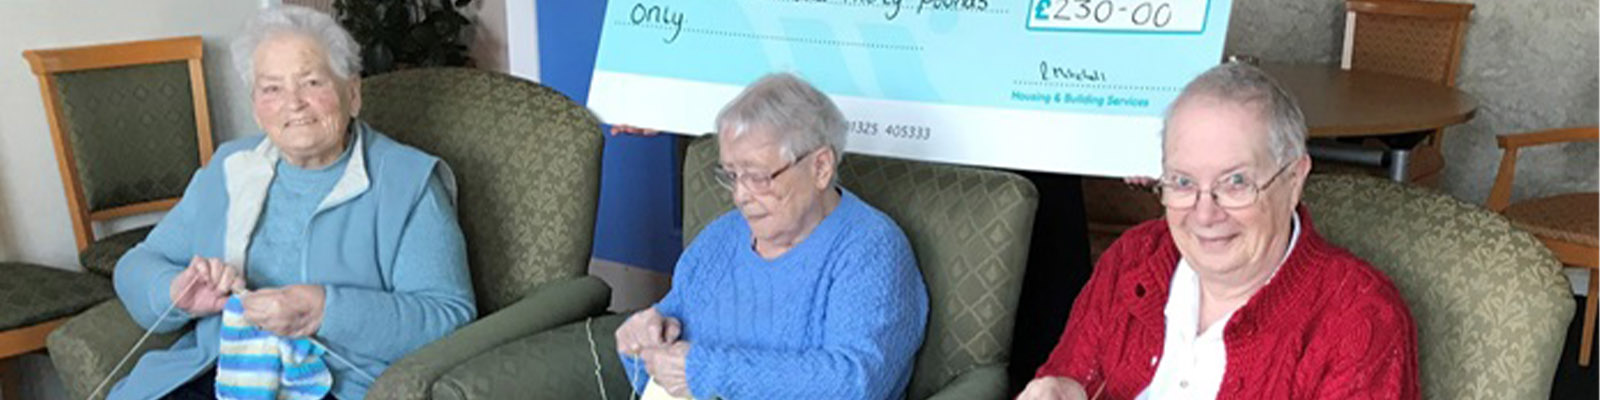 members of the knitting group receiving a cheque